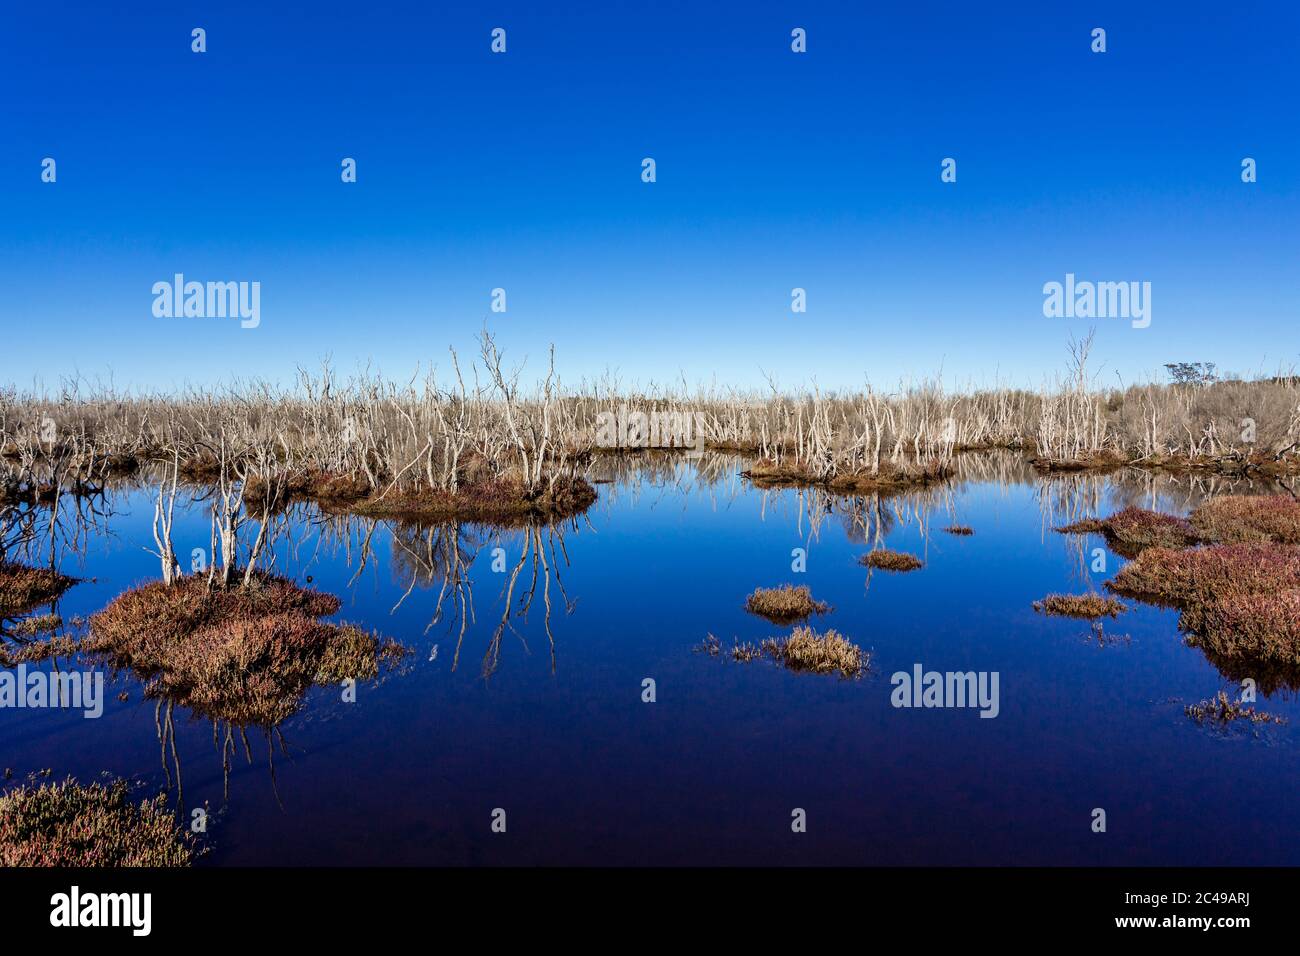 Wetland at a natural reserve with a dense and healthy saltmarsh and dried paperbark trees Stock Photo